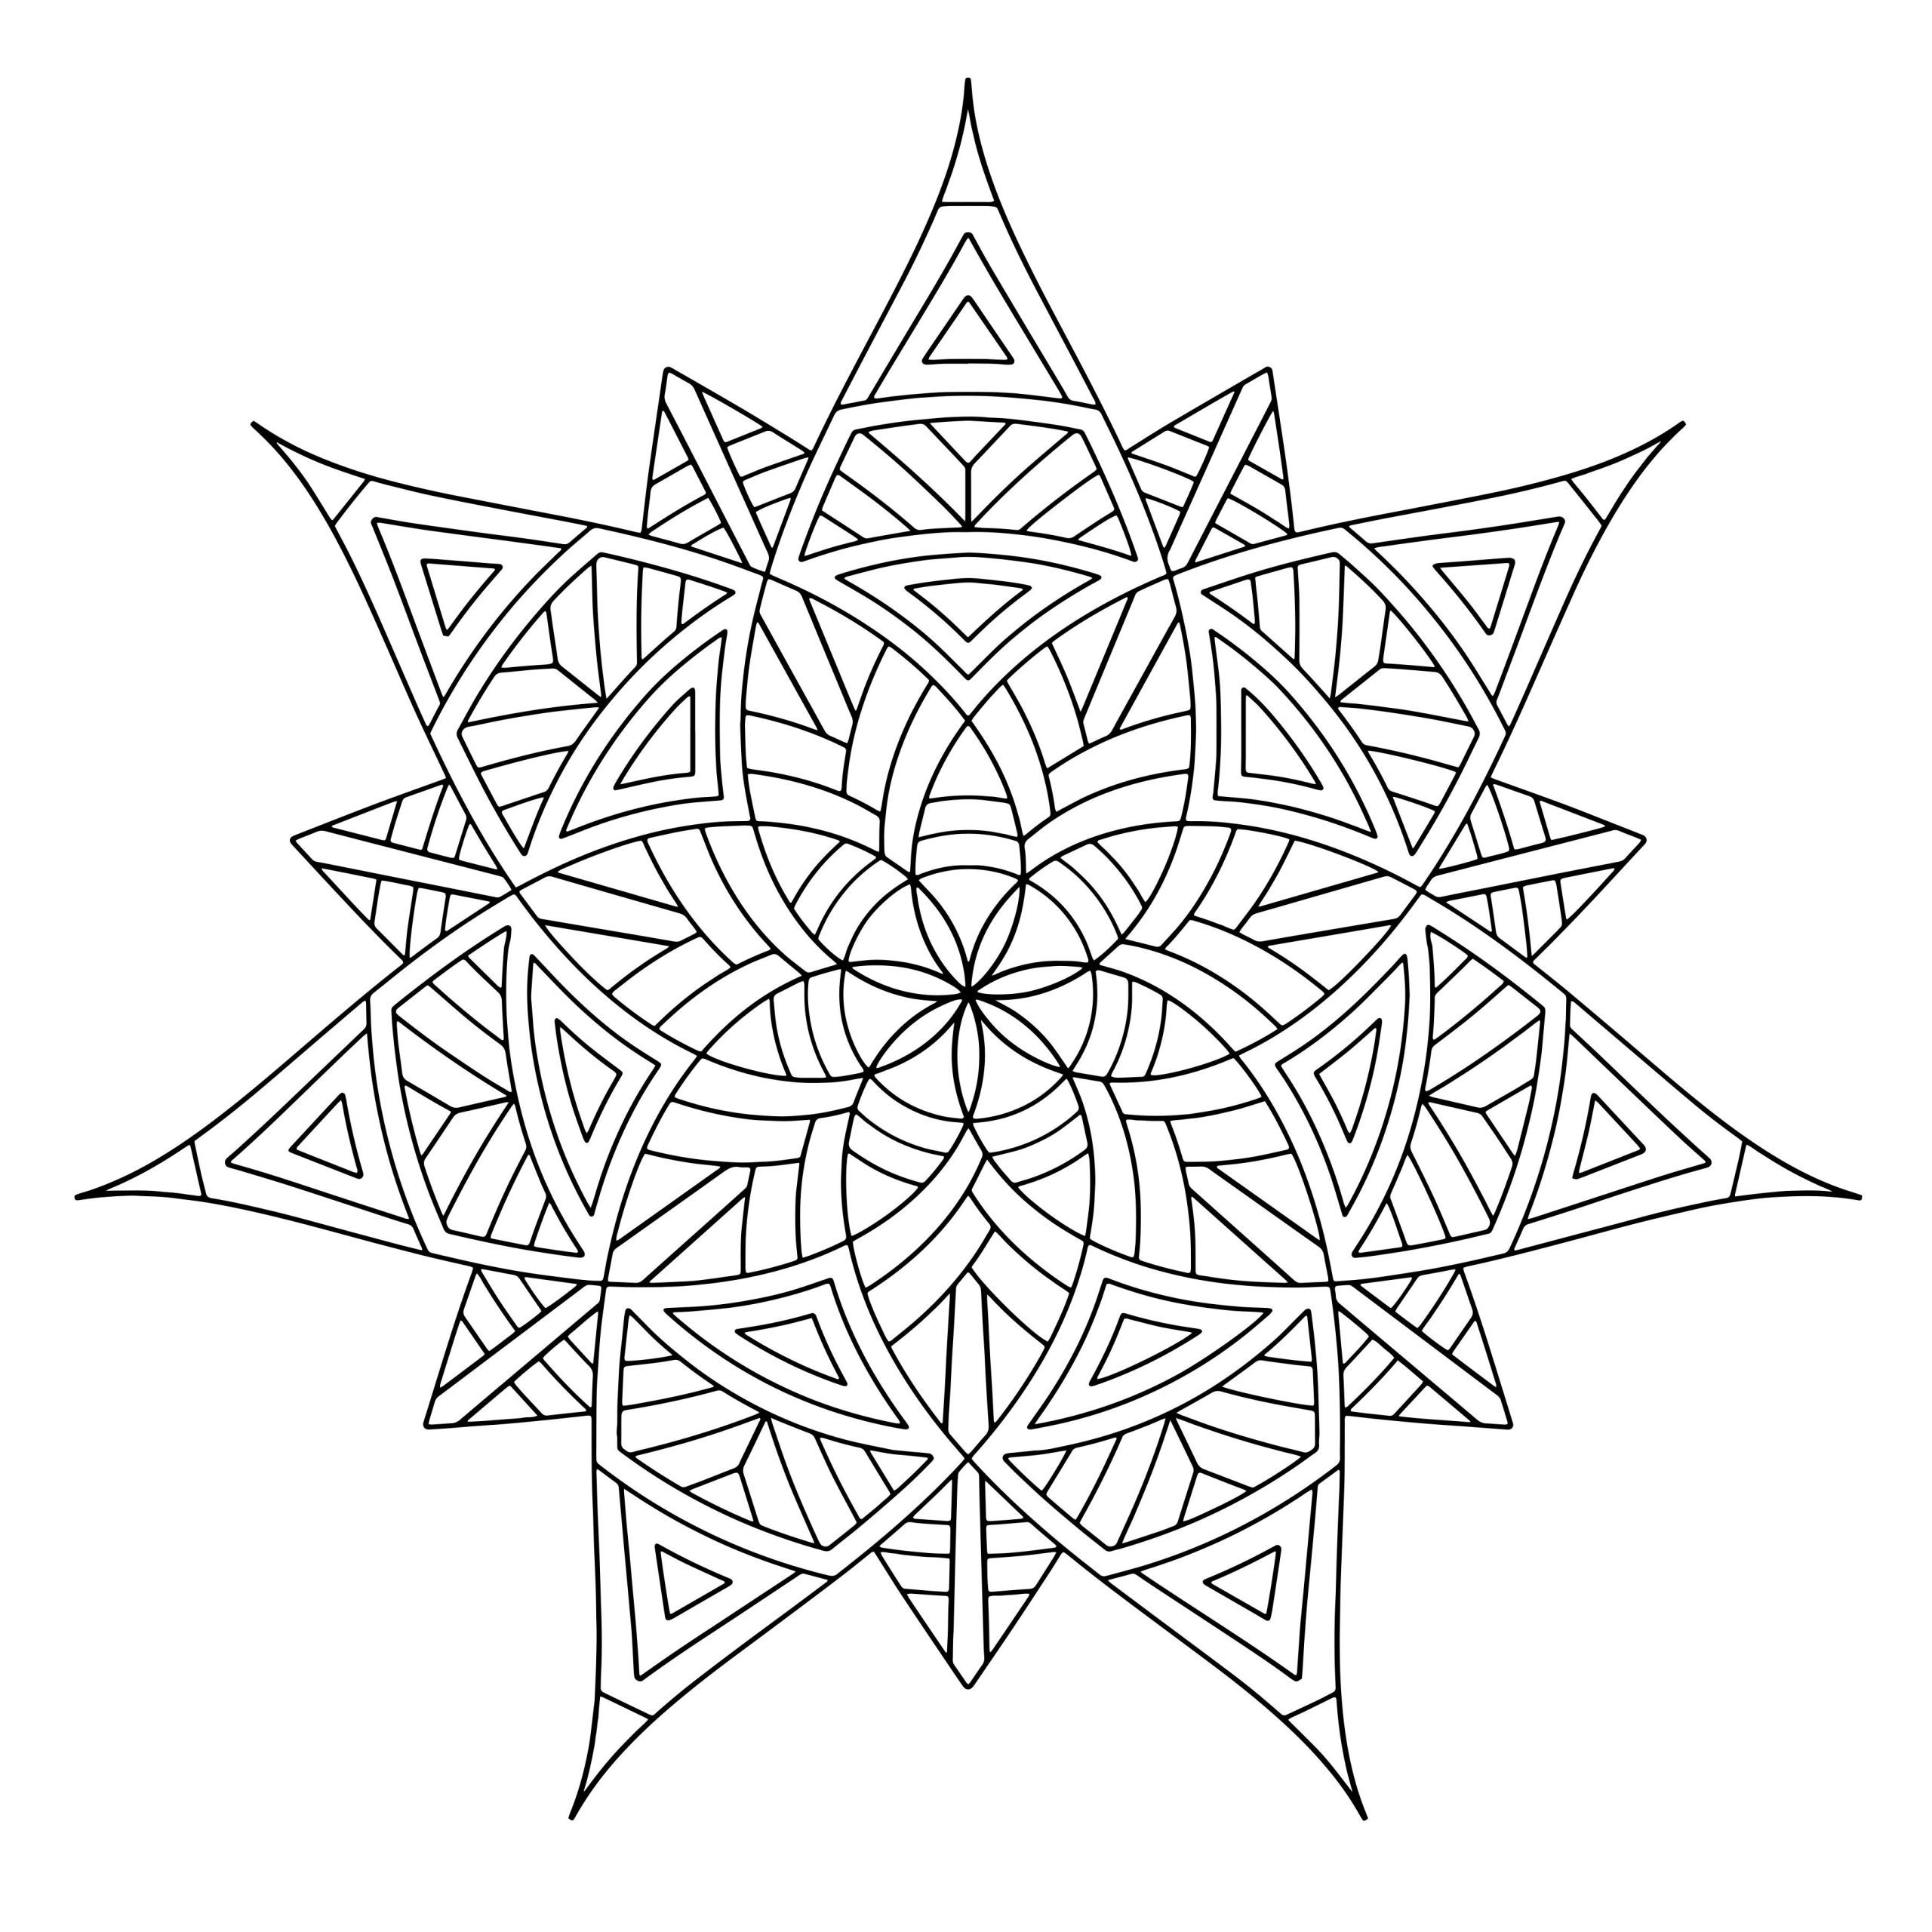 Pattern Coloring Pages For Kids
 Free Printable Geometric Coloring Pages For Kids